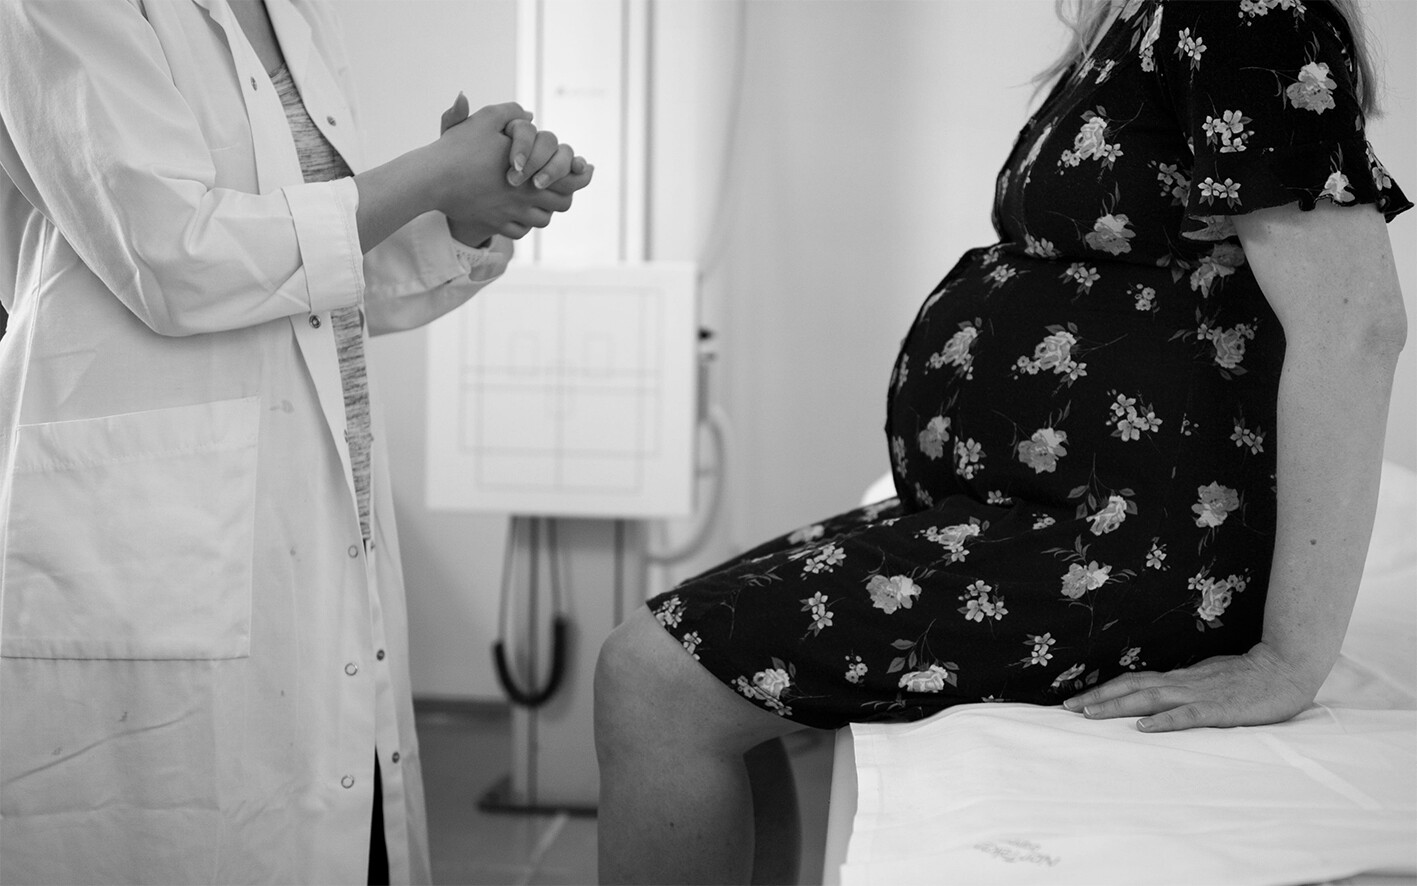 A pregnant person speaking with a doctor. We see both of their torsos, not their heads or faces.